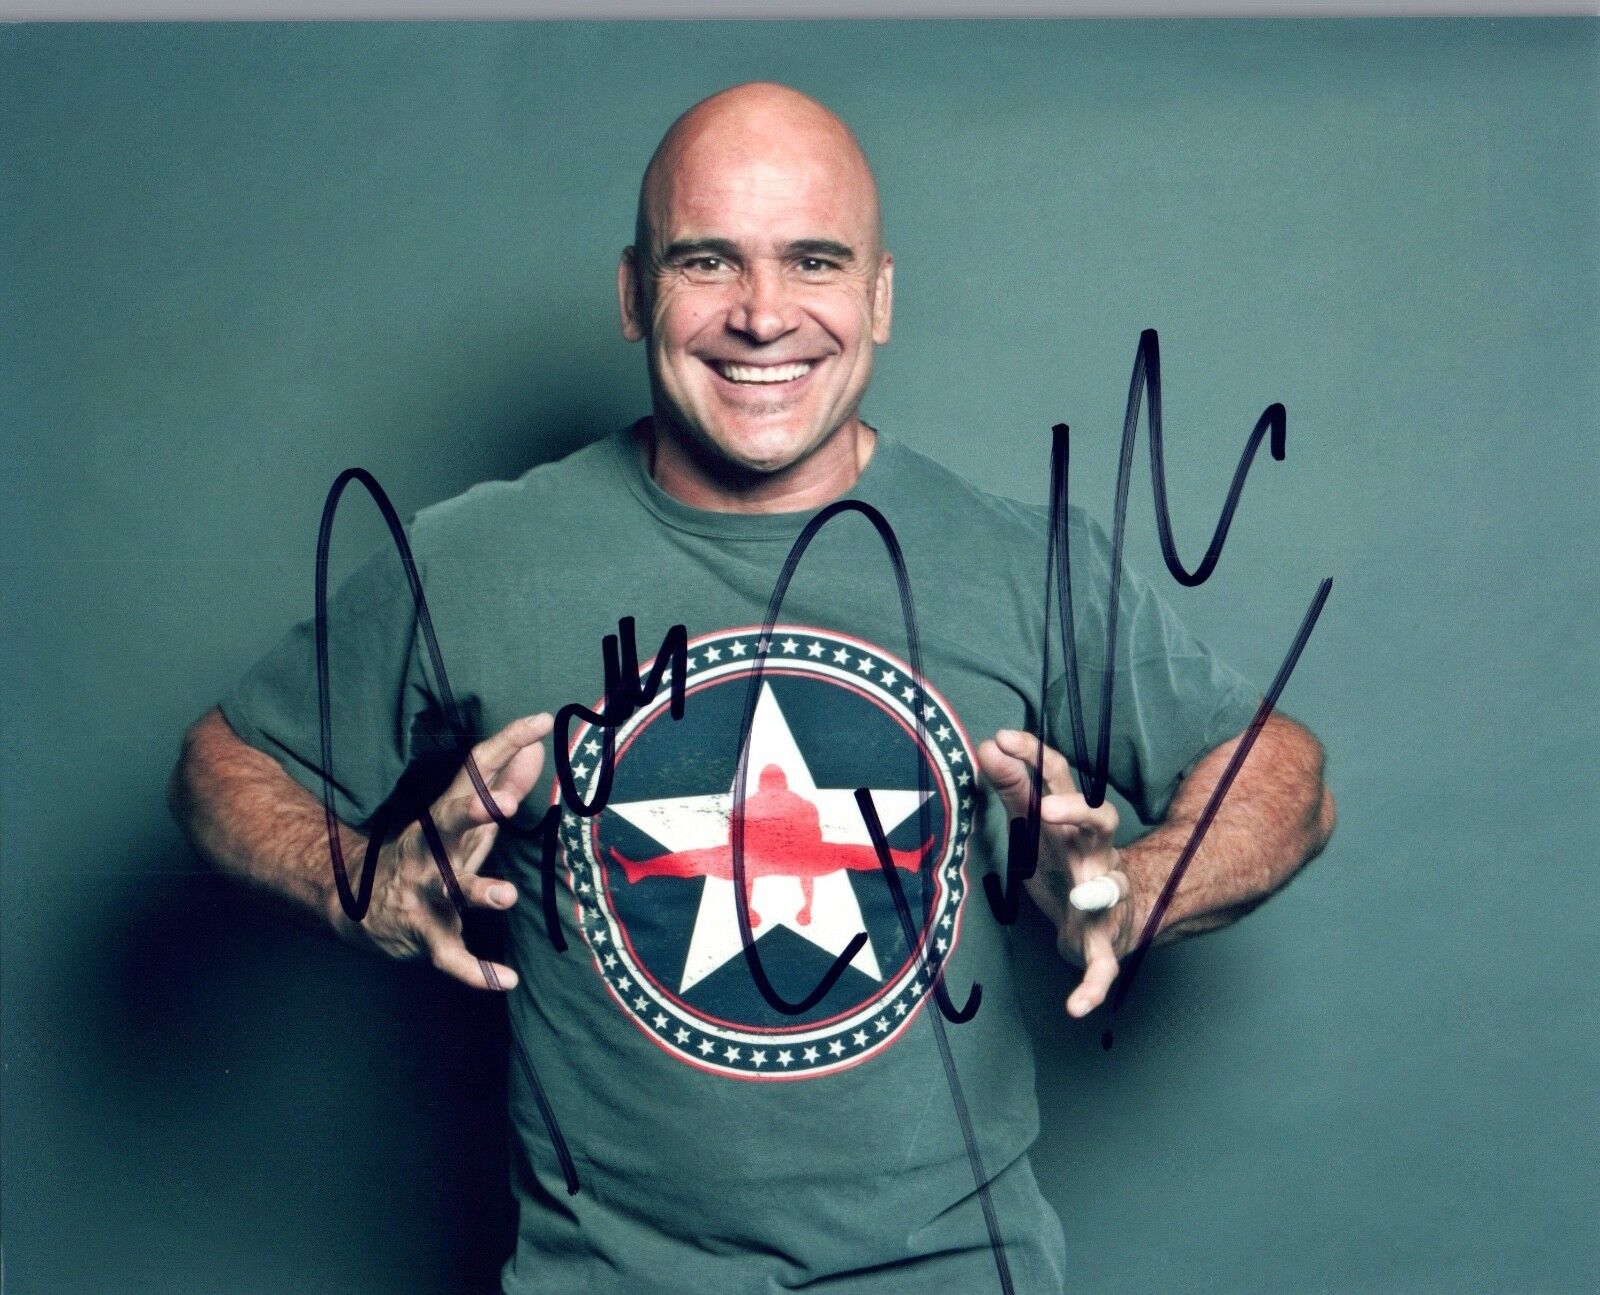 Bas Rutten Signed Autographed 8x10 Photo Poster painting UFC MMA Fighter COA AB